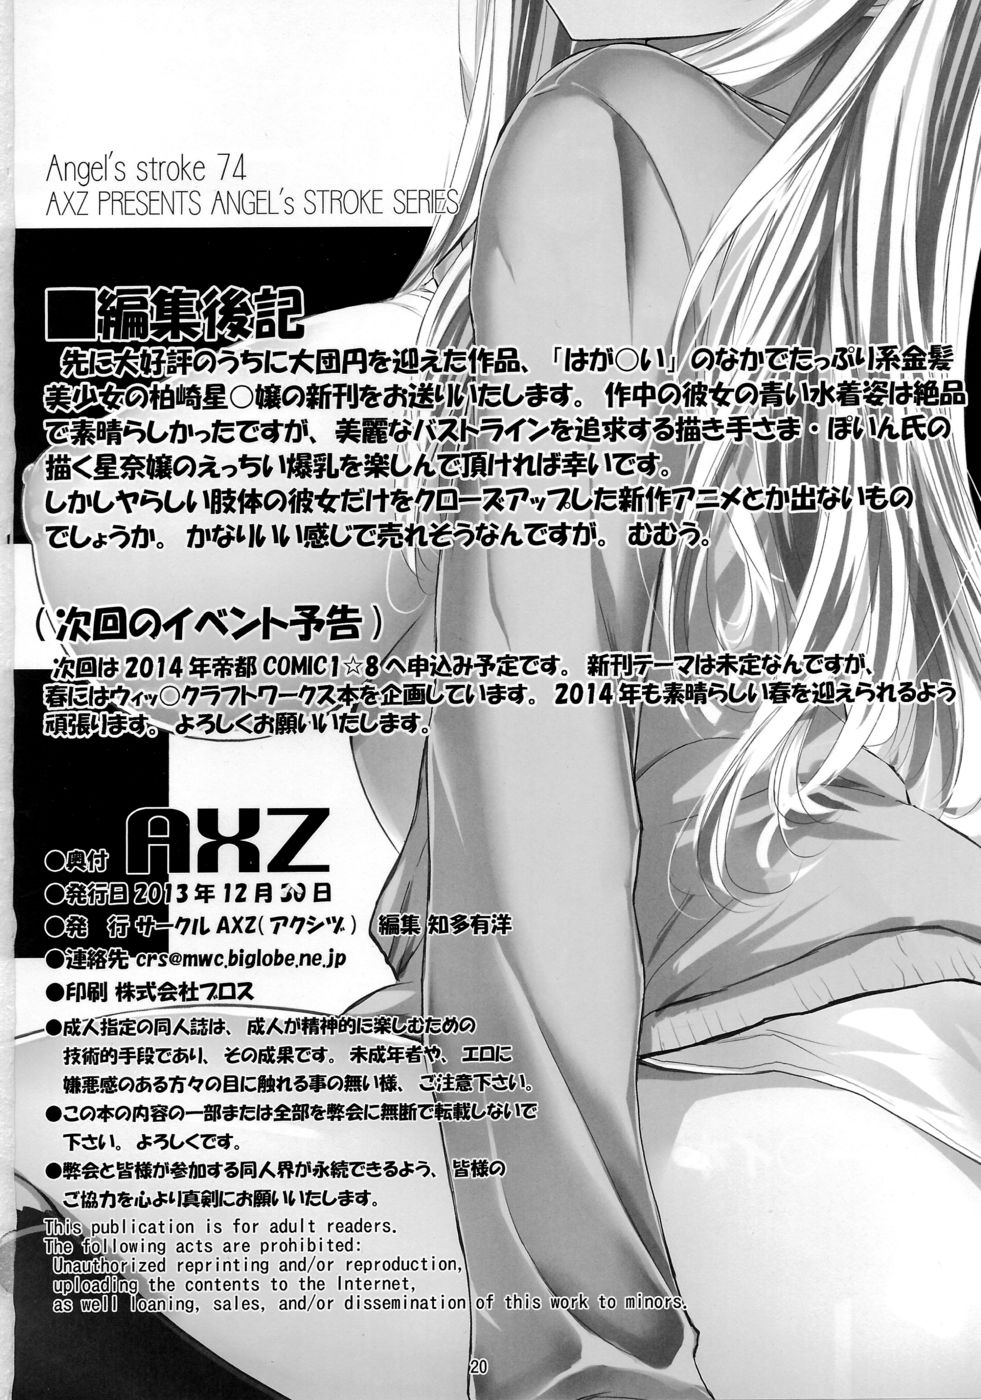 Hentai Manga Comic-Angels stroke 74 Meat x Meat, Meat and Wild Carnal Desires-Read-21